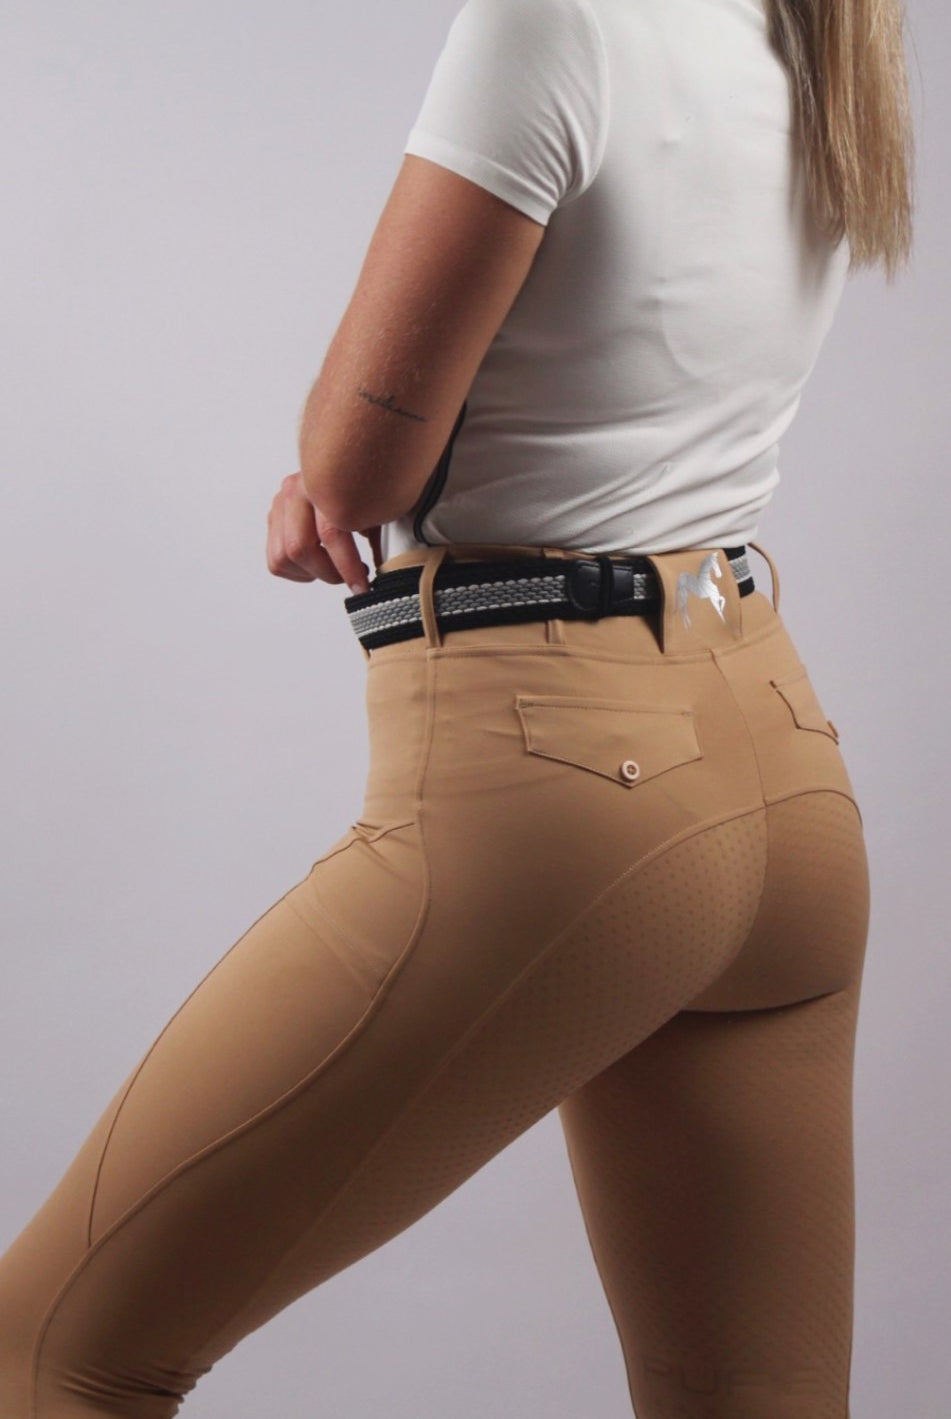 A close-up of a rider's leg in sleek tan riding tights, showcasing a comfortable and flexible fit.